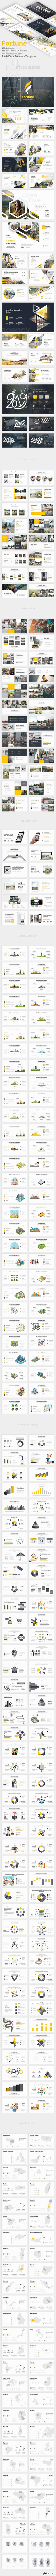 GraphicRiver - Fortune Premium Pitch Deck Powerpoint Template 22600204